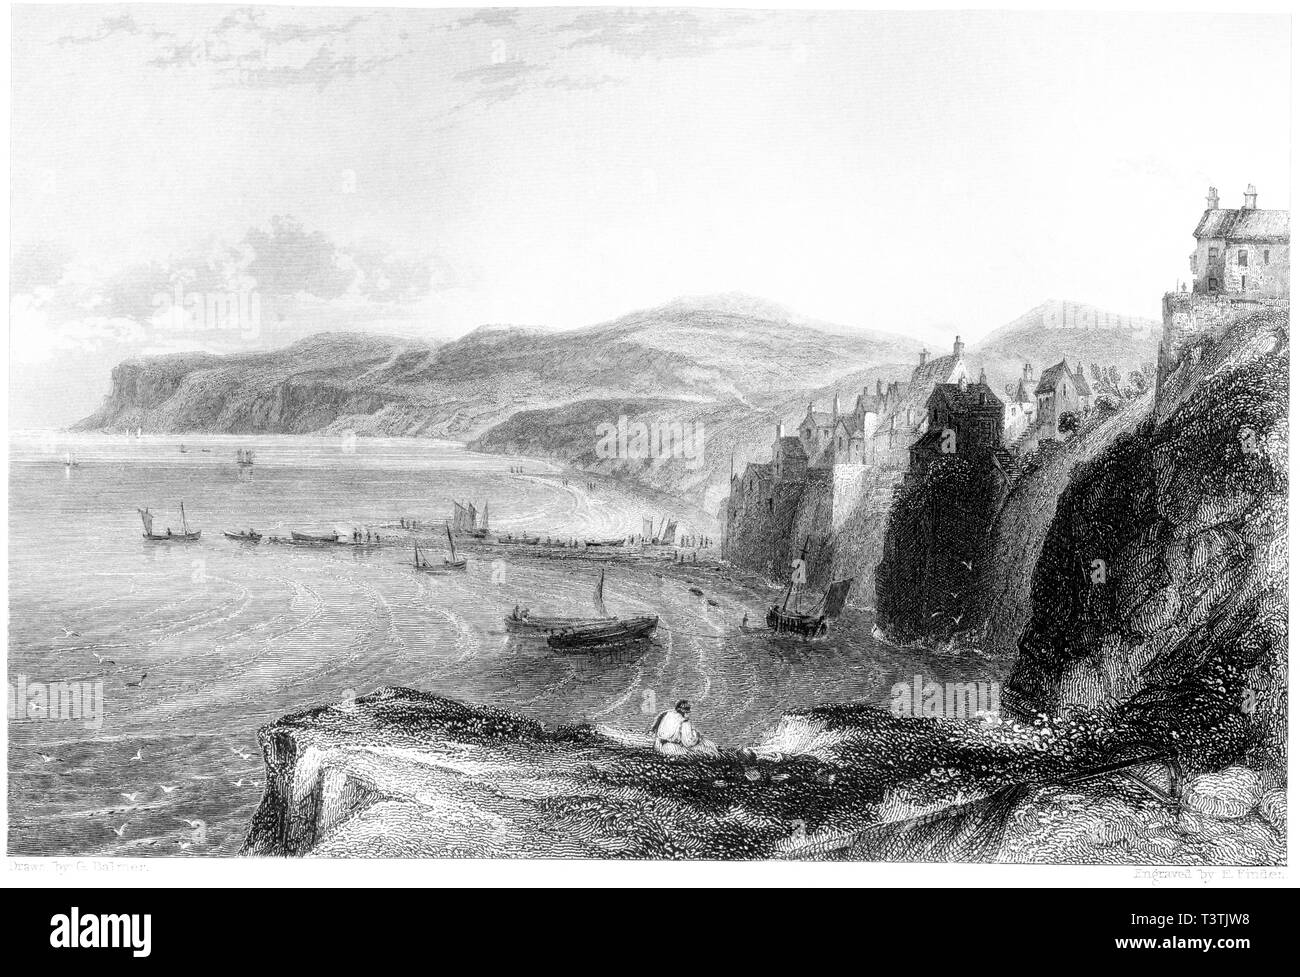 An engraving of Robin Hoods Bay, Yorkshire scanned at high resolution from a book published in 1842. Believed copyright free. Stock Photo